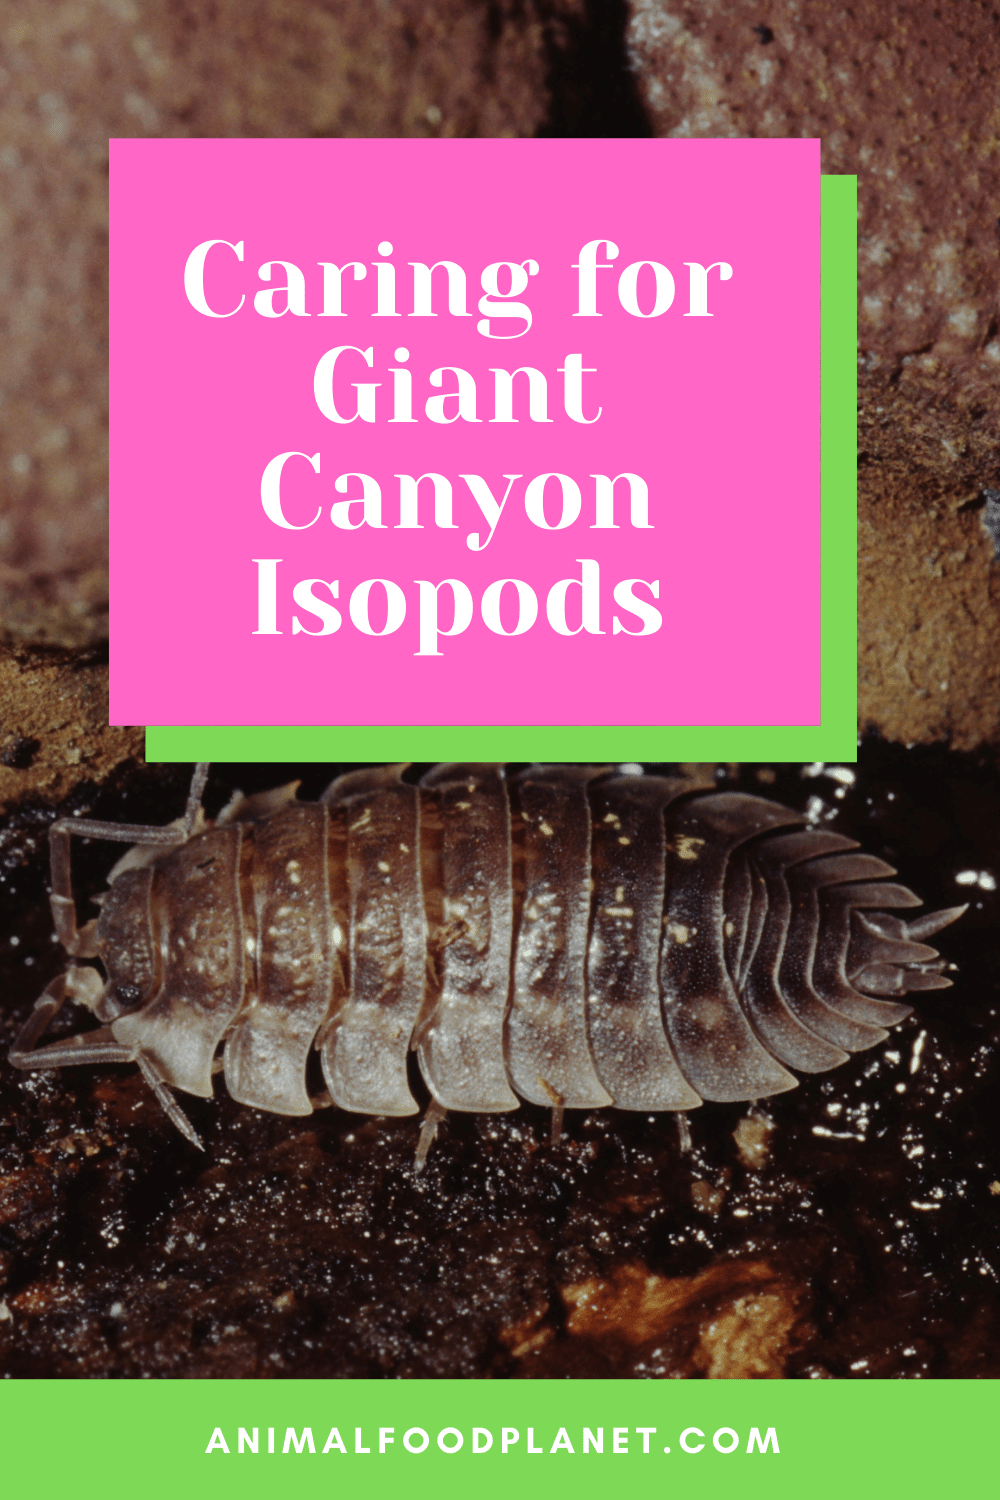 Caring for Giant Canyon Isopods